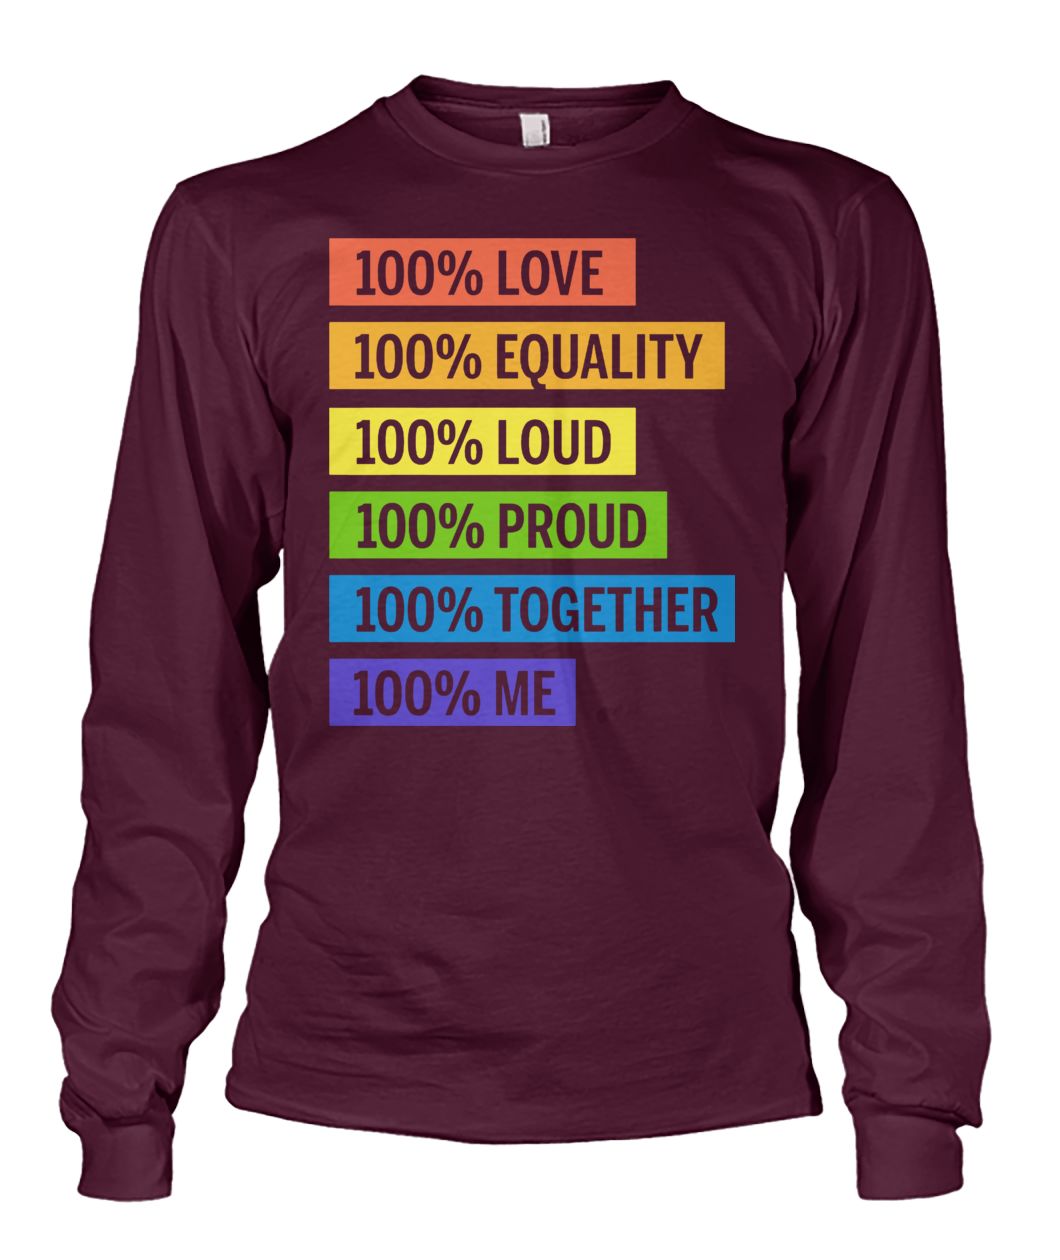 Brendon urie 100& love 100% equality 100% proud unisex long sleeve